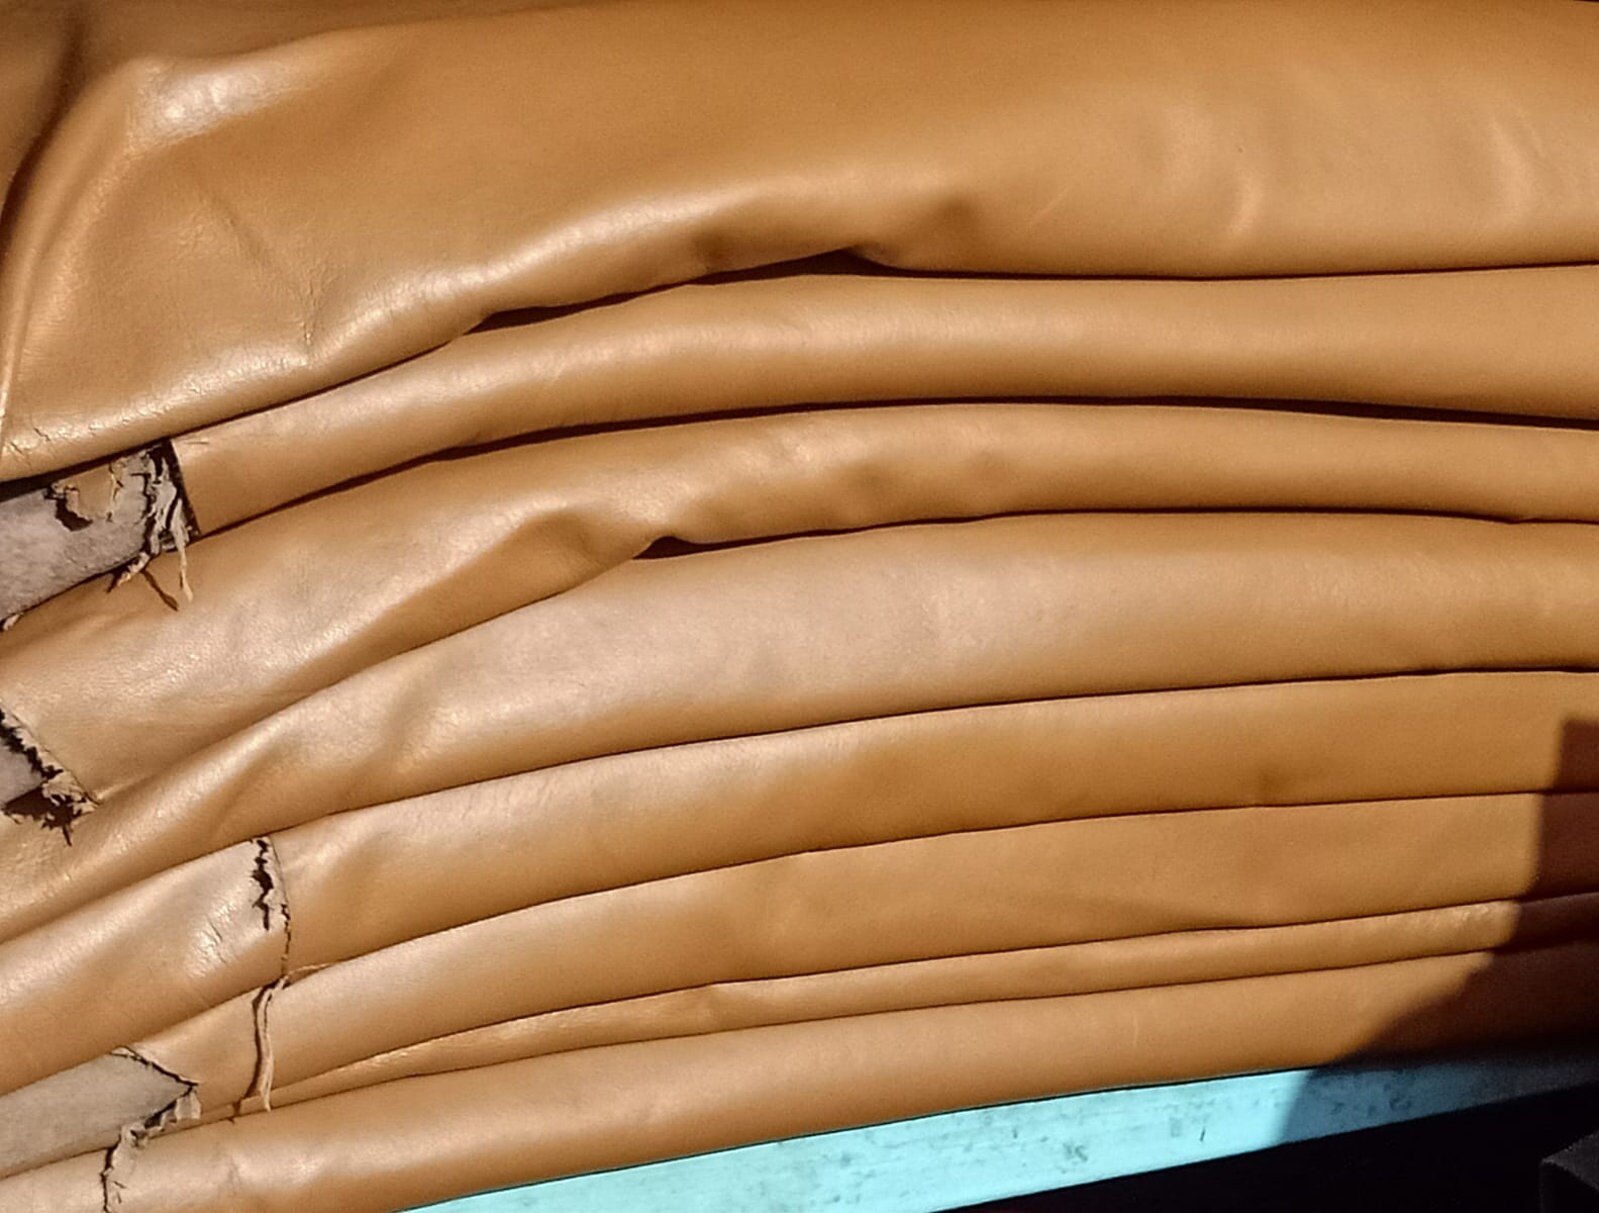 Faux Leather Sheets -Vinyl Marine Weatherproof Furniture Material Synthetic Imitation Leather Fabric 0.5mm Thick for Upholstery Hand Crafts, DIY